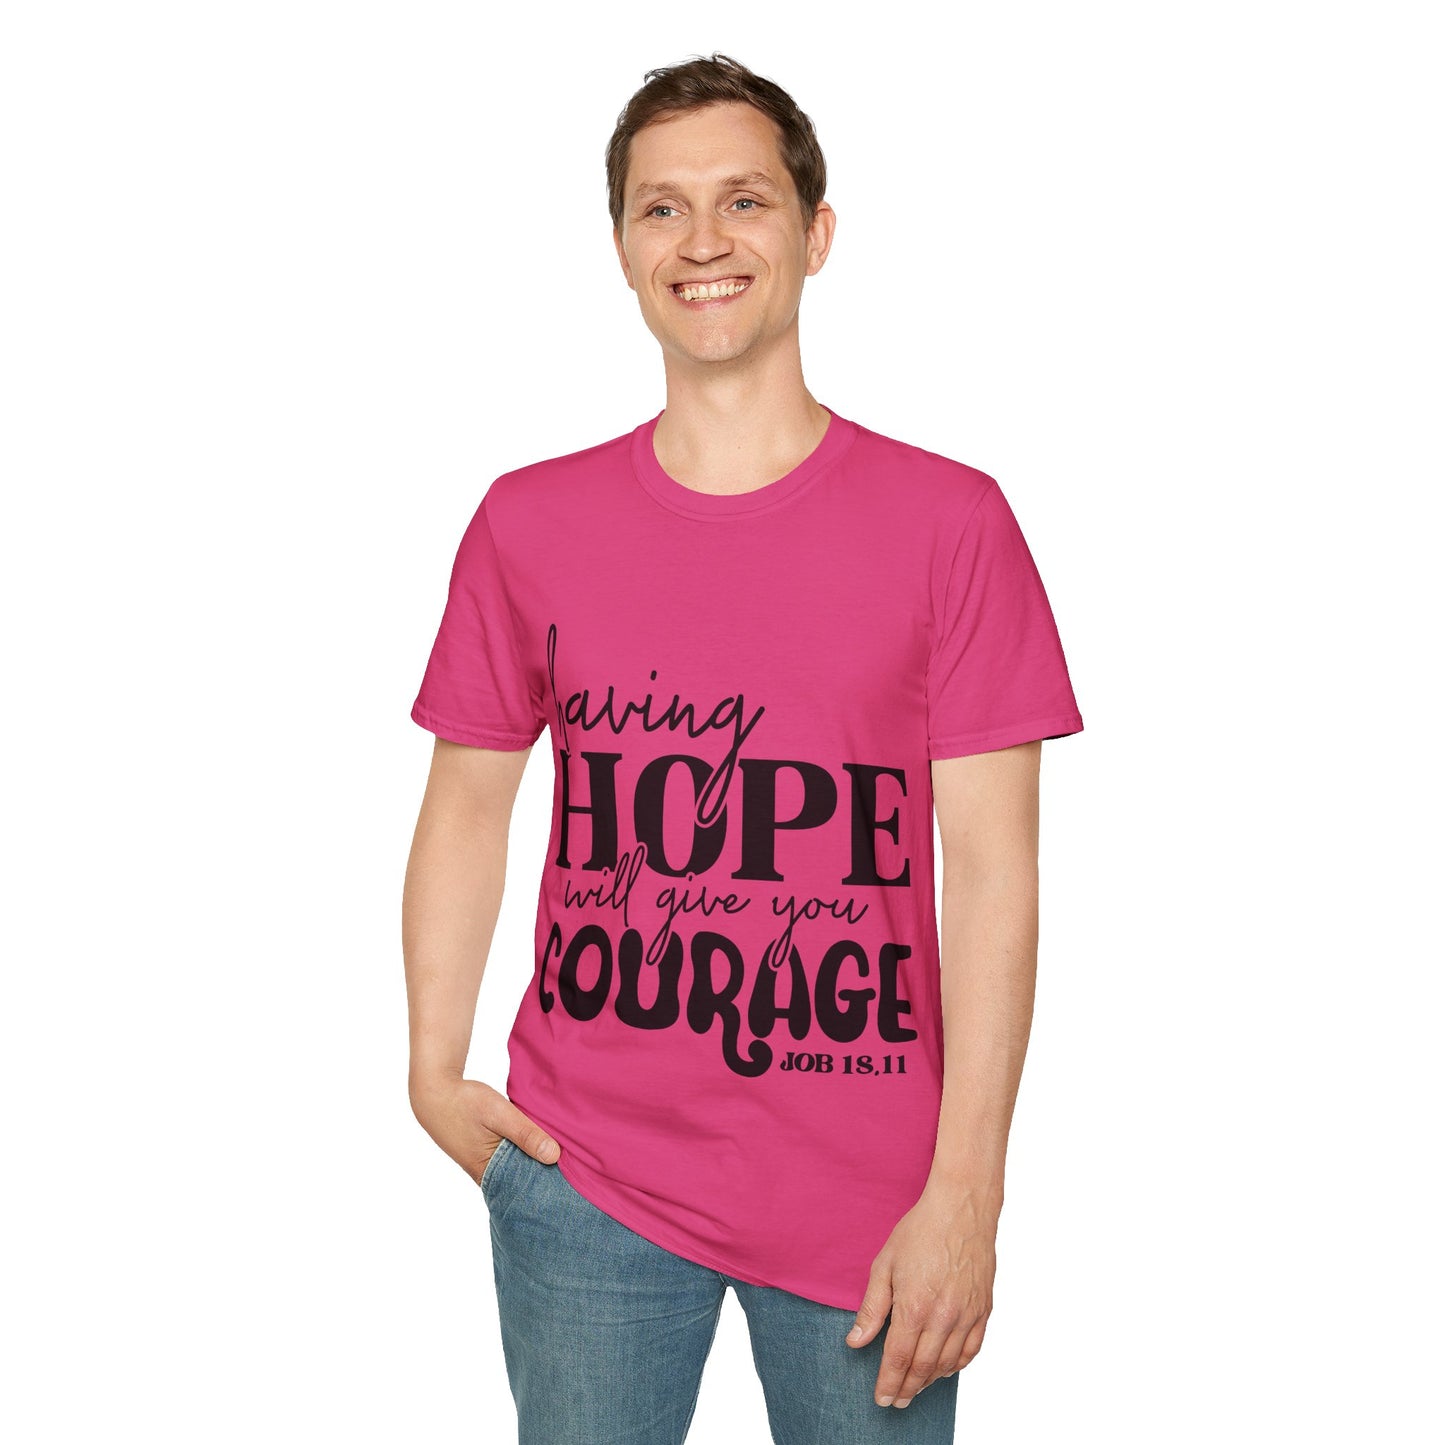 Having Hope Will Give You Courage 11,18 (2) Triple Viking T-Shirt